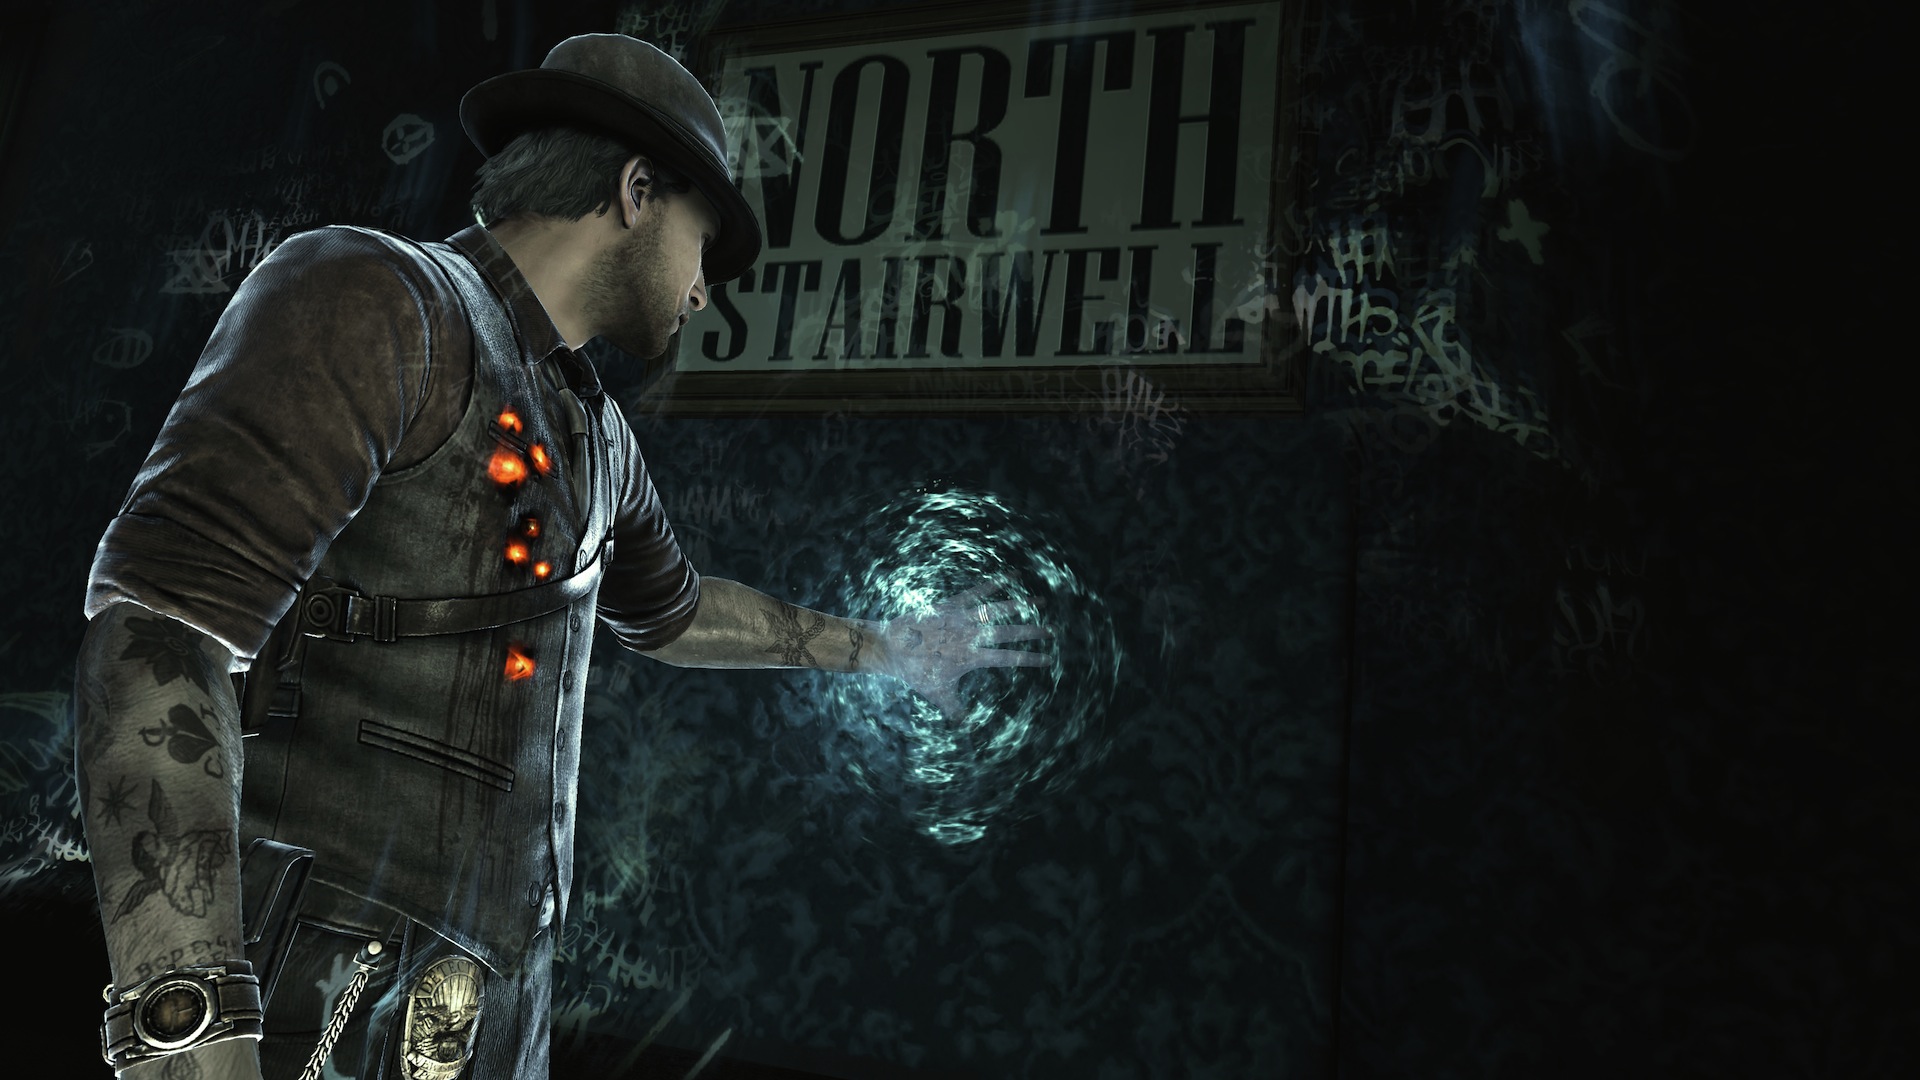 Murdered: Soul Suspect Pics, Video Game Collection